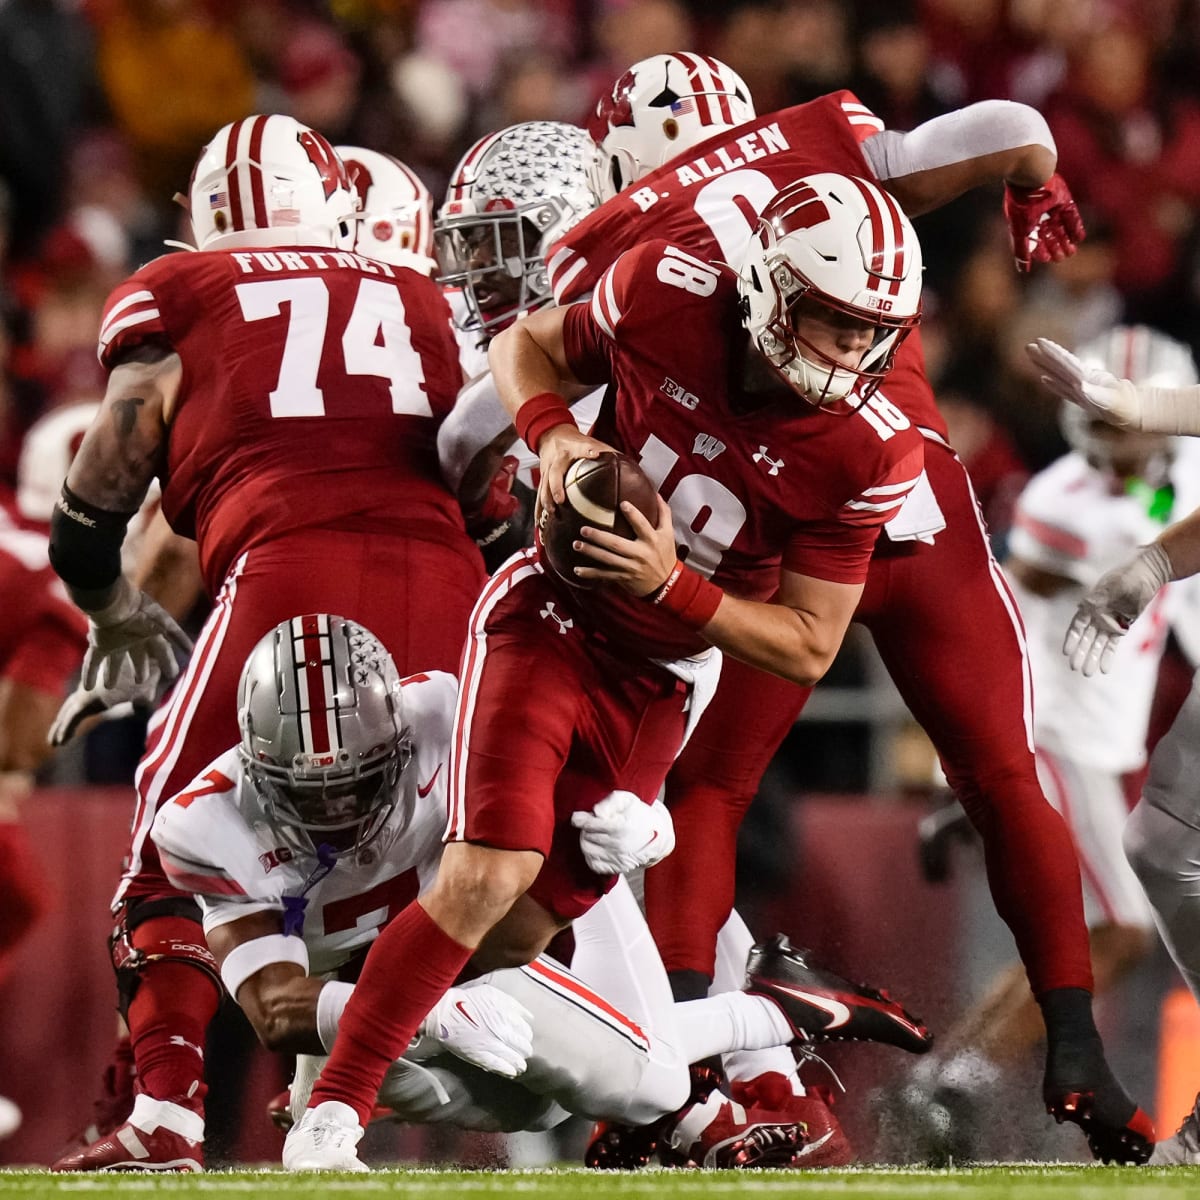 3 things that stood out from Wisconsin's loss at No. 3 Ohio State